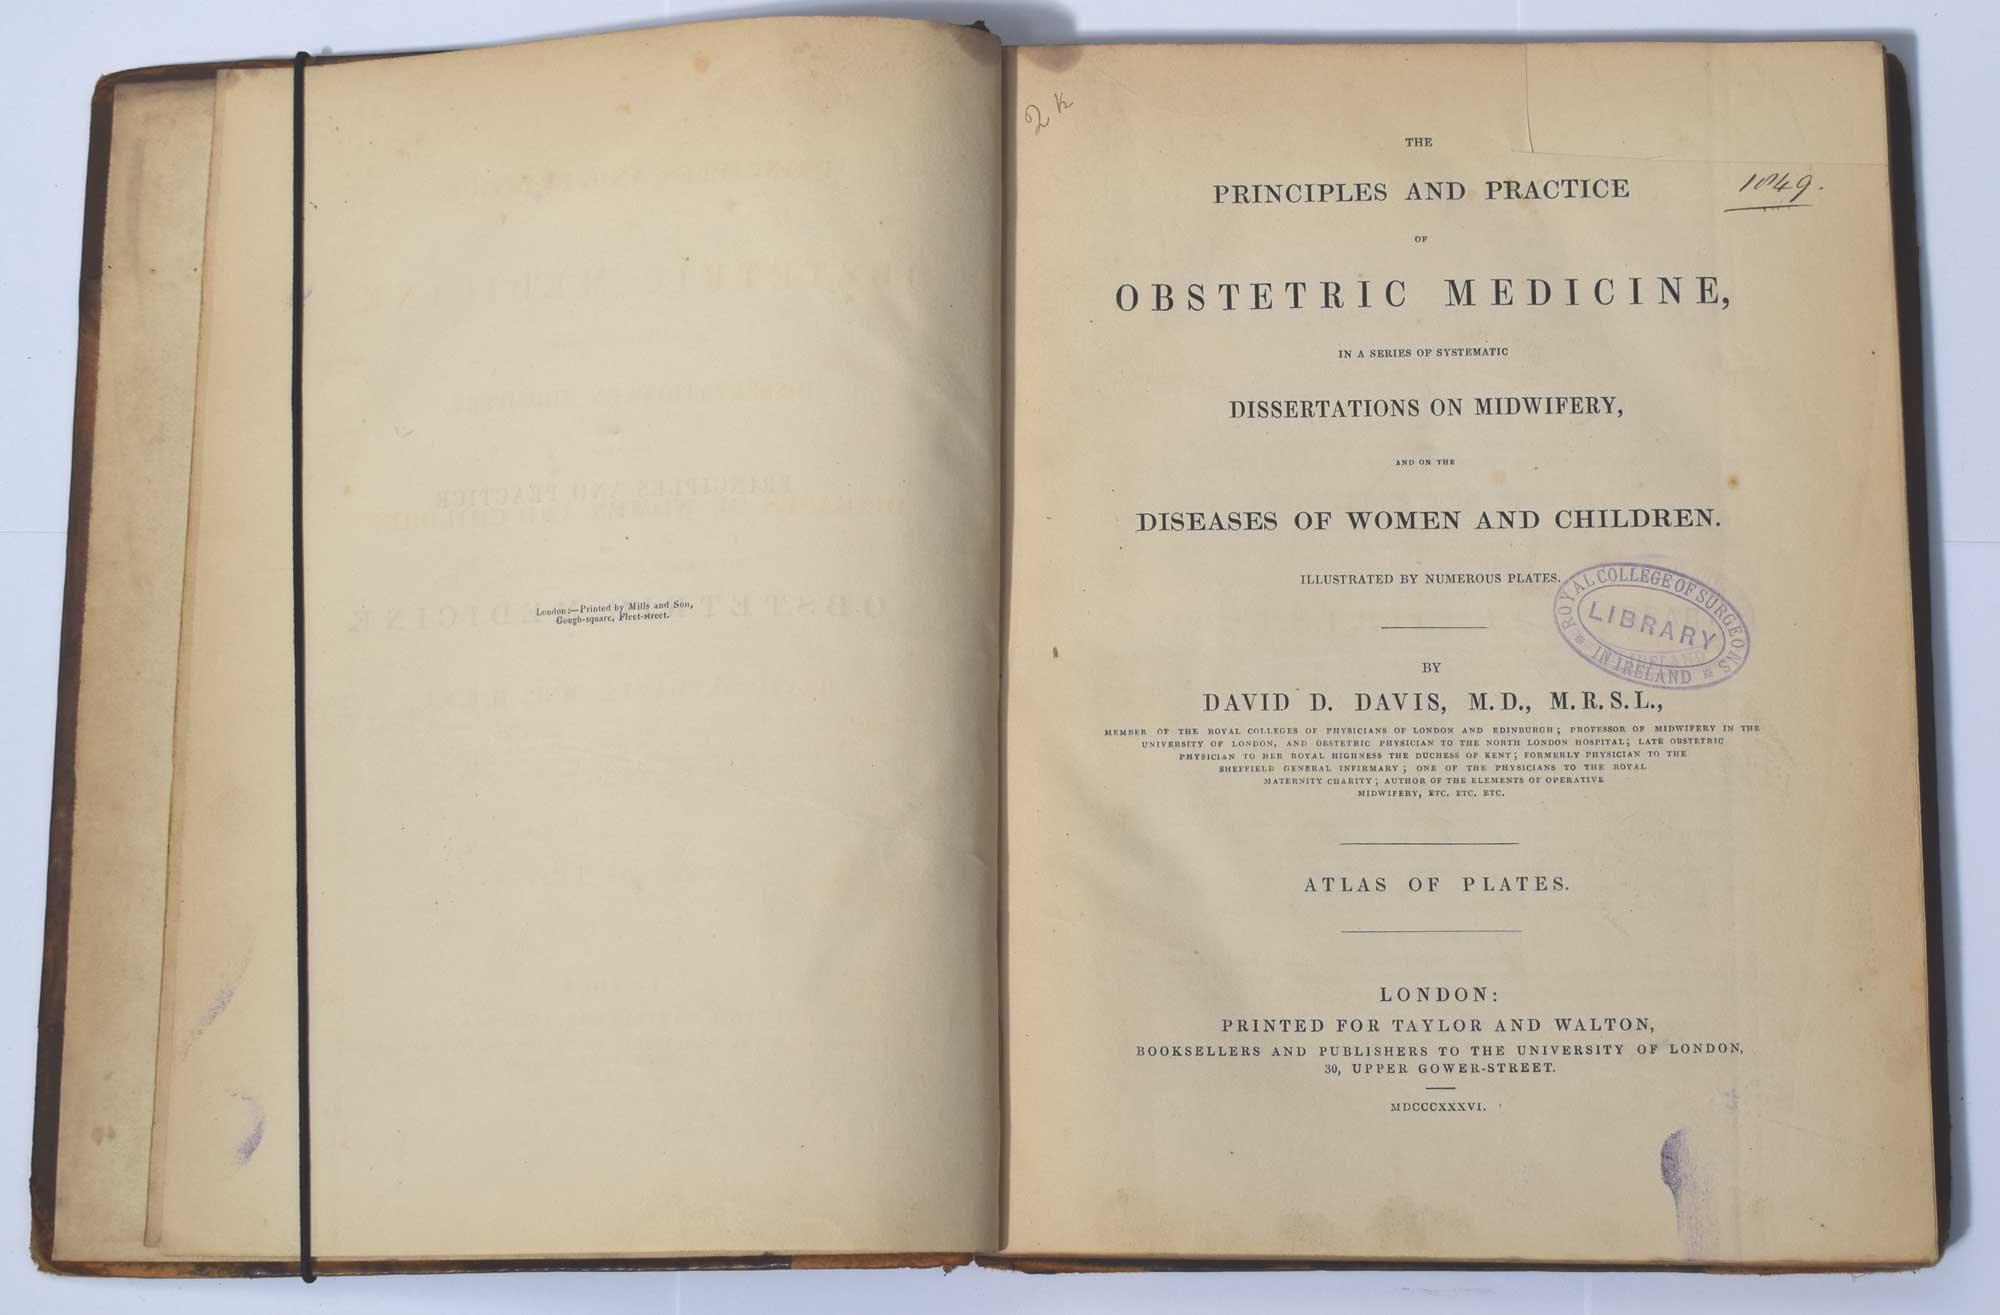 The Principles and Practice of Obstetric Medicine, in a Series of Systematic Dissertations on Midwifery, and on the Diseases of Women and Children. Atlas of Plates.